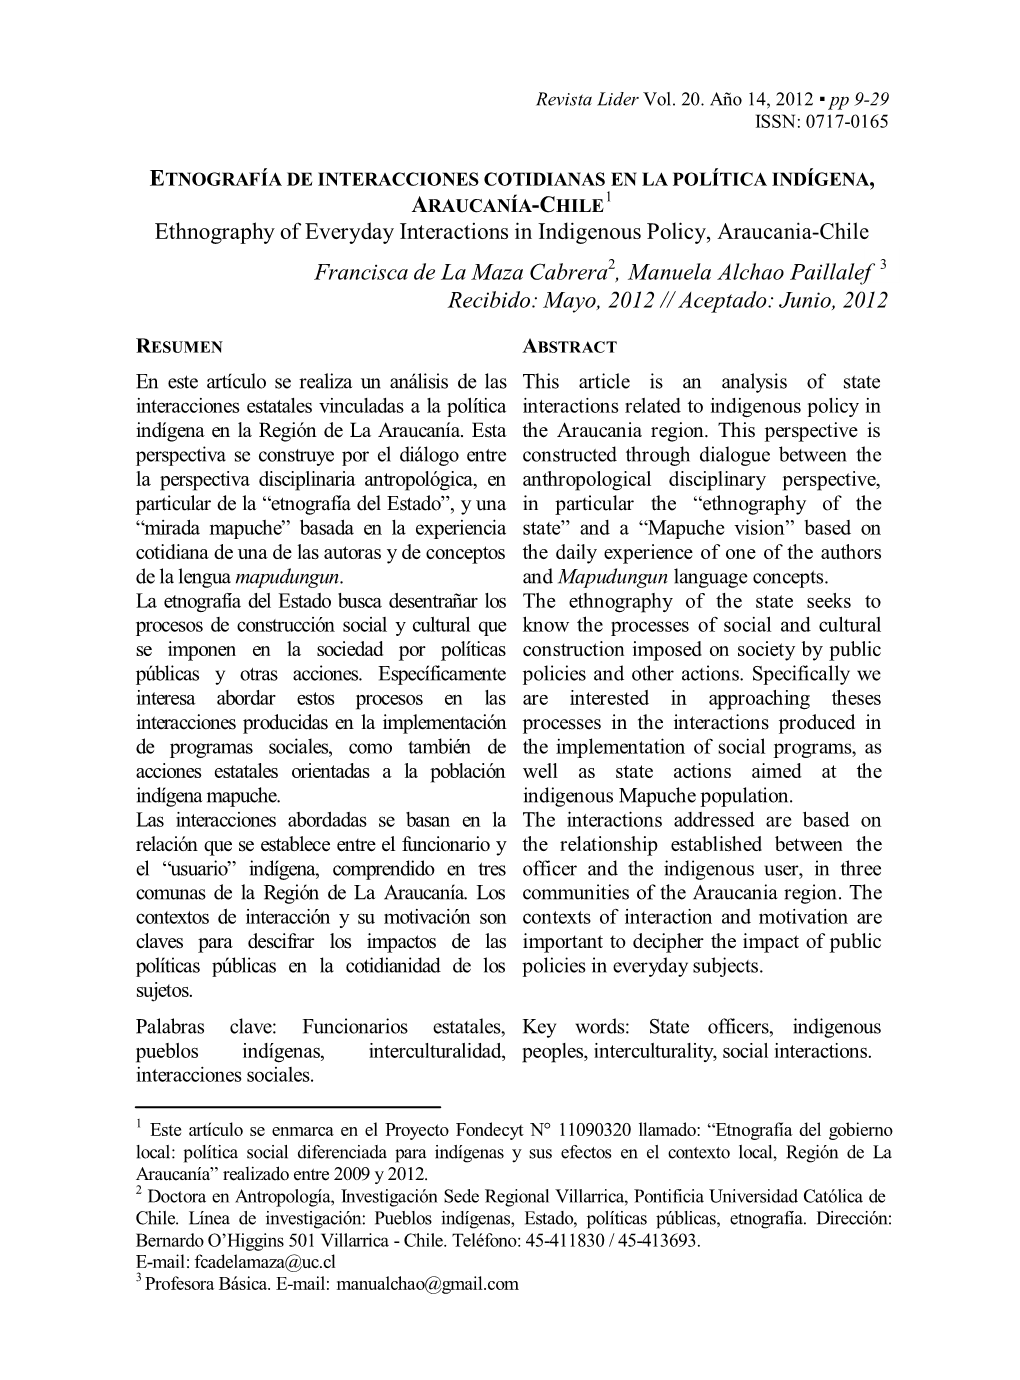 Ethnography of Everyday Interactions in Indigenous Policy, Araucania-Chile